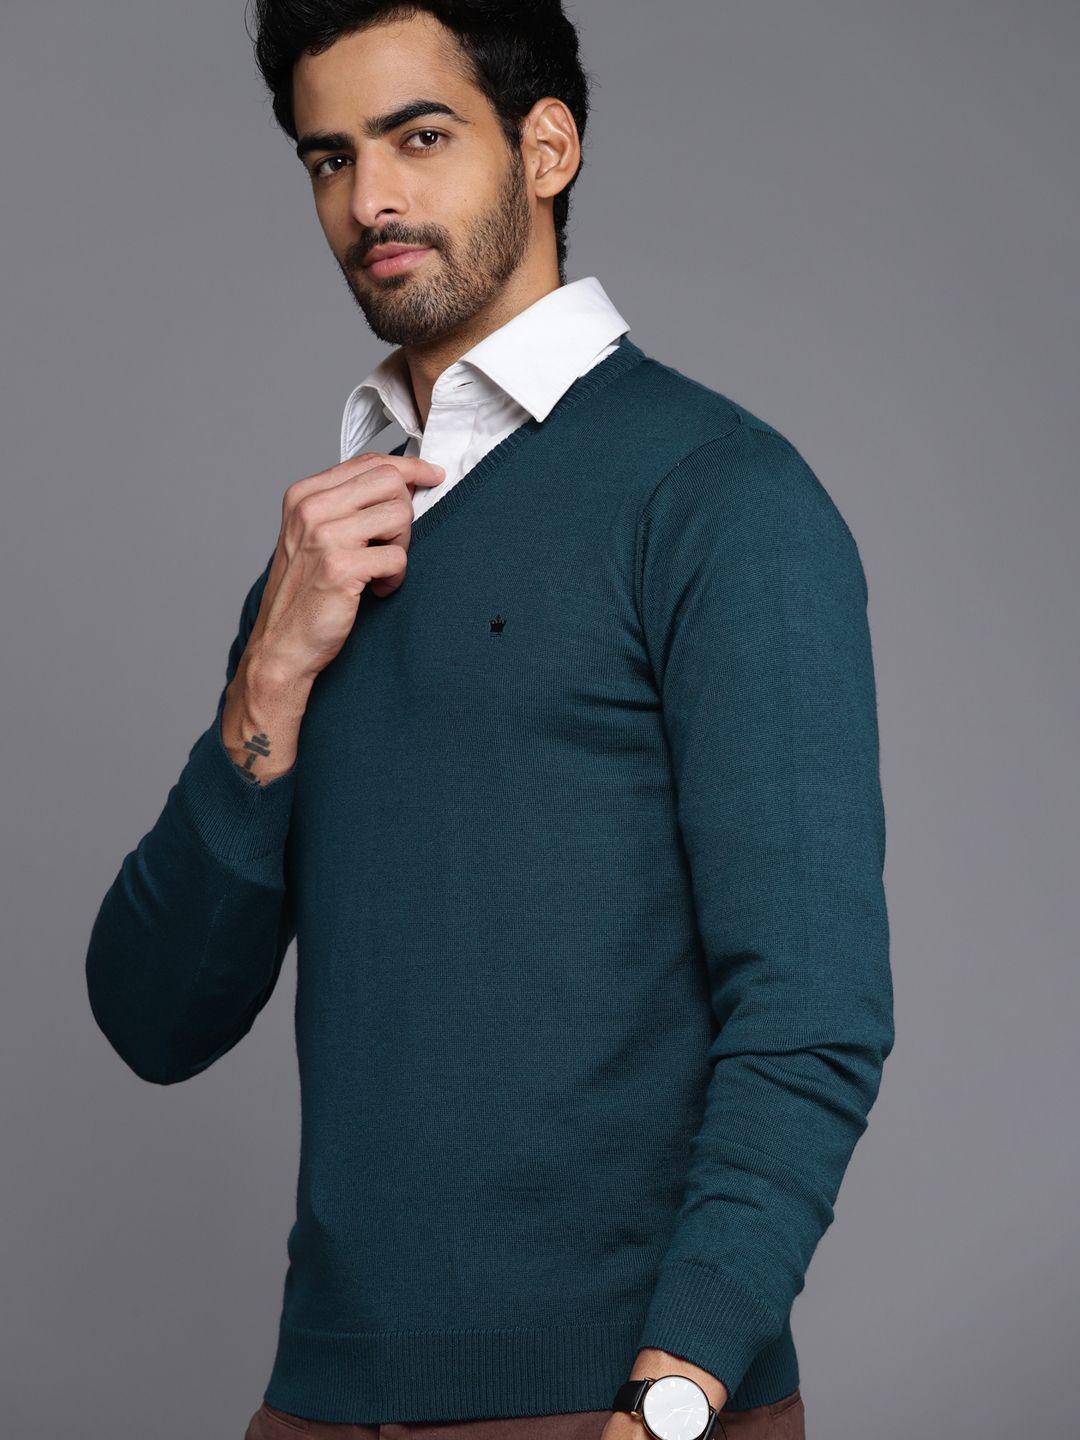 louis philippe men teal green v-neck solid pullover